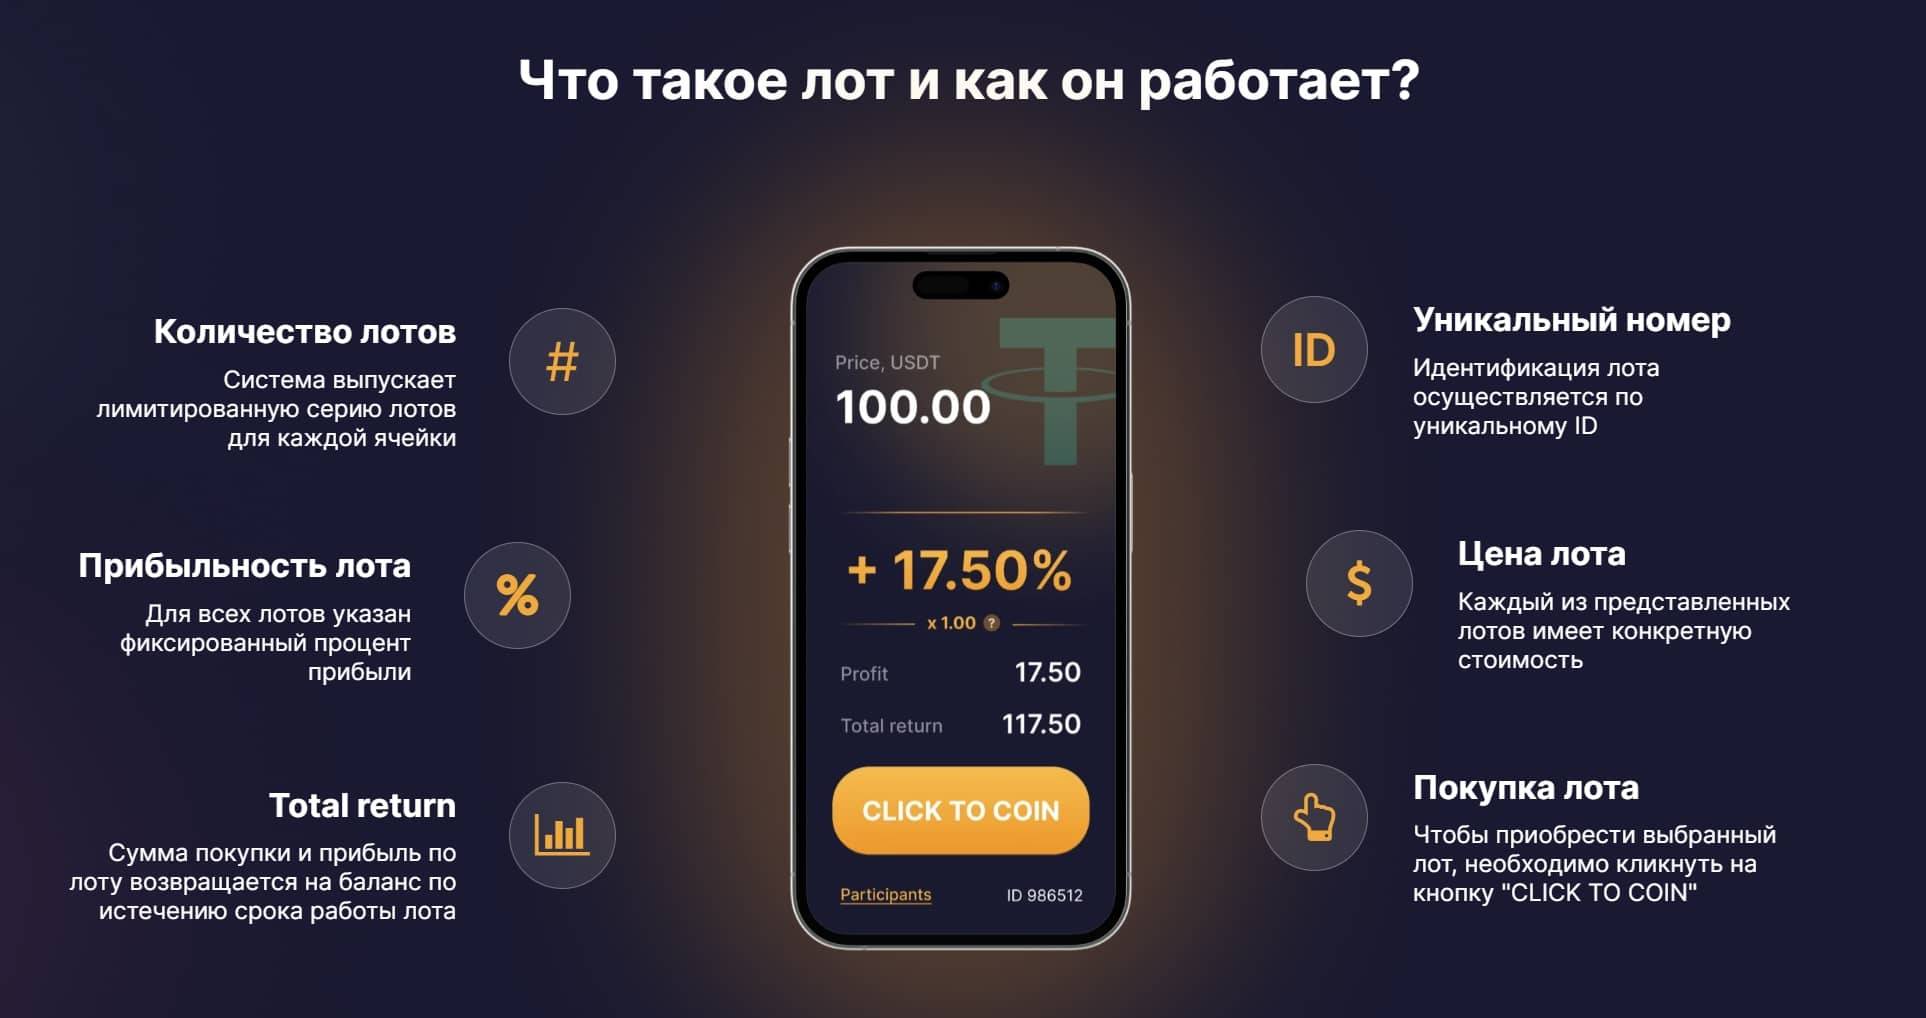 click-to-coin.click маркетинг